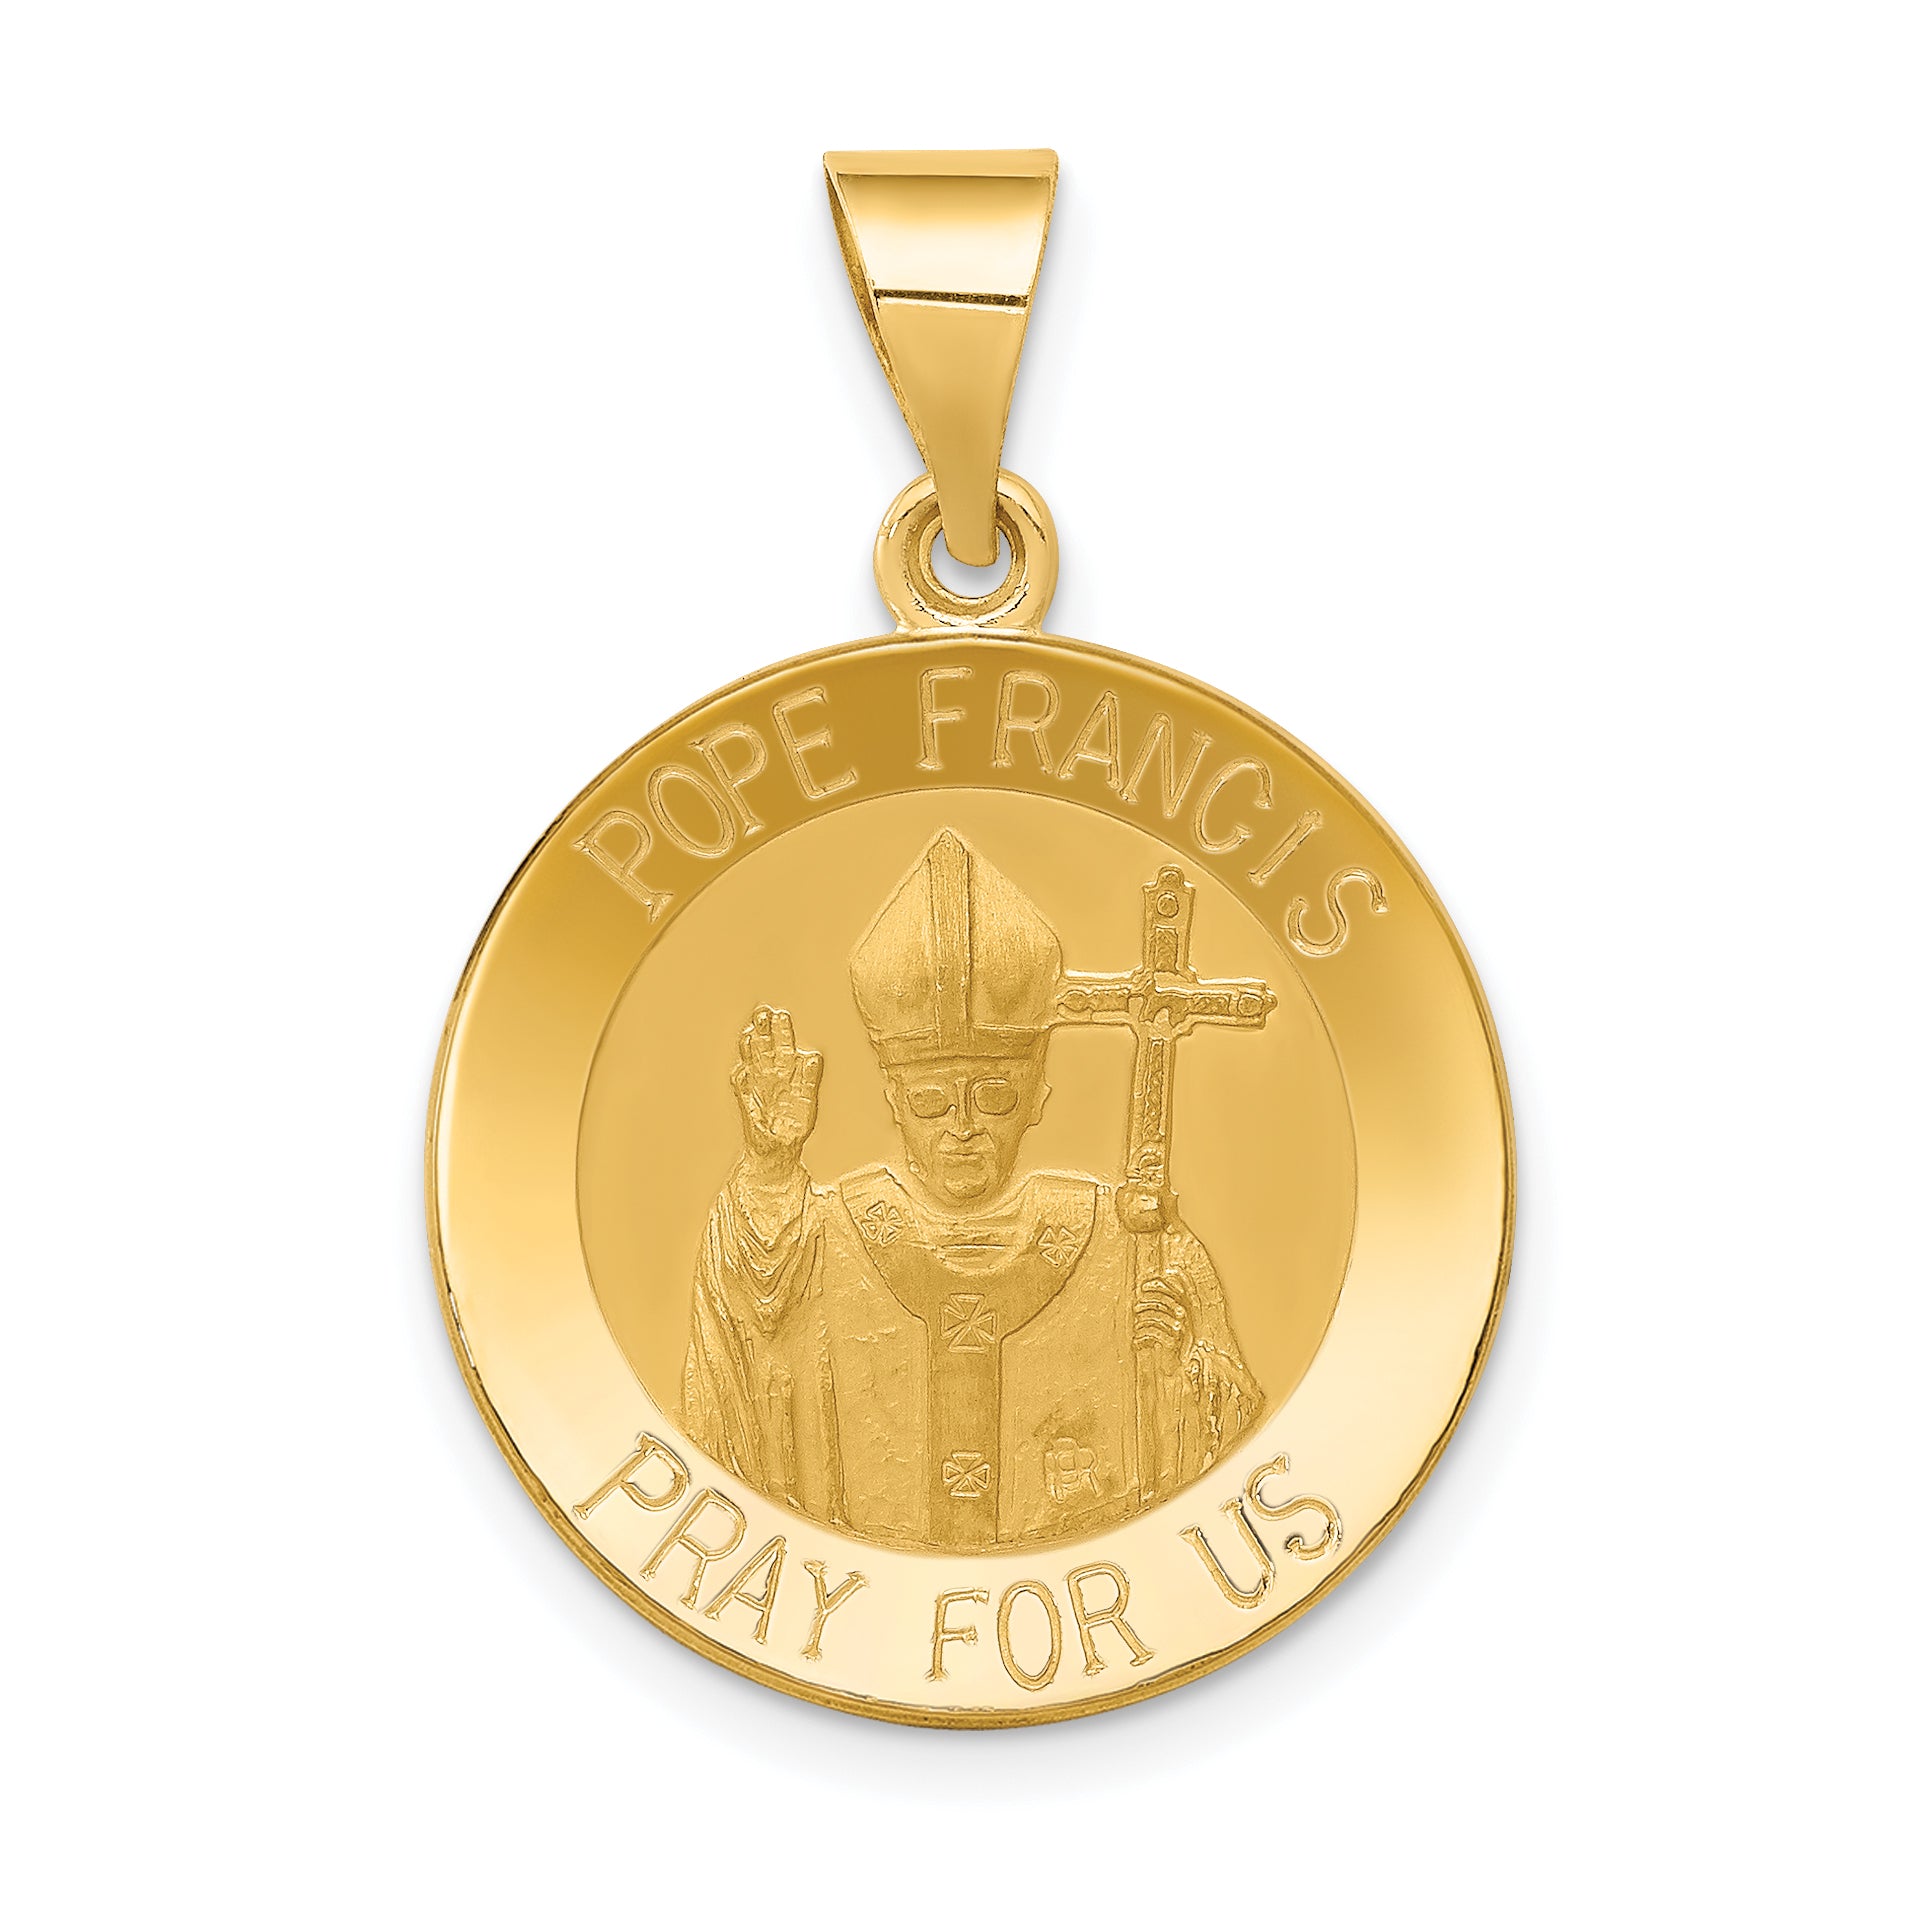 14K Gold Satin &Polished Hollow Pope Francis Medal